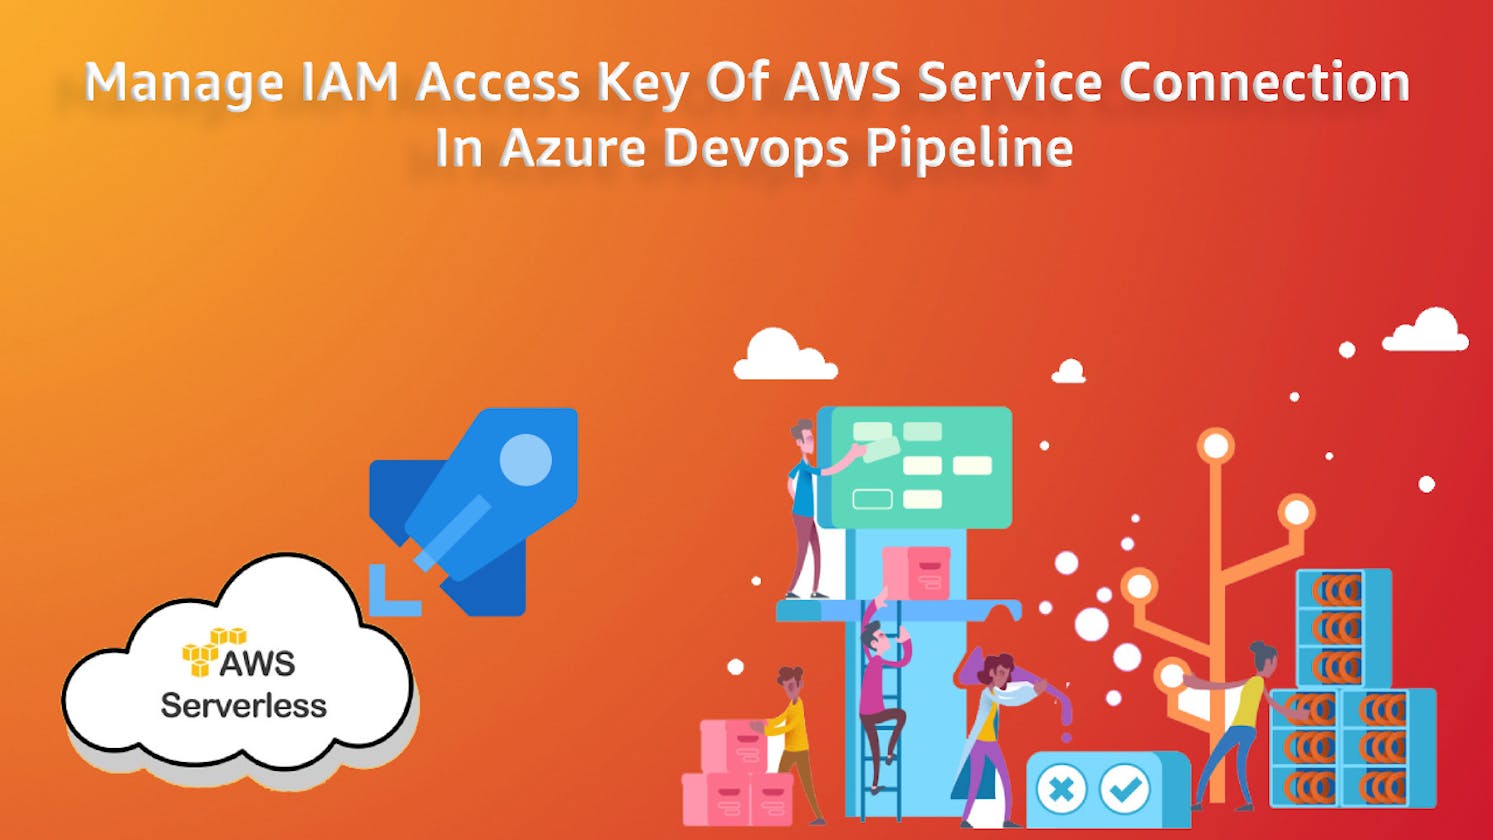 Manage IAM Access Key Of AWS Service Connection In Azure Devops Pipeline